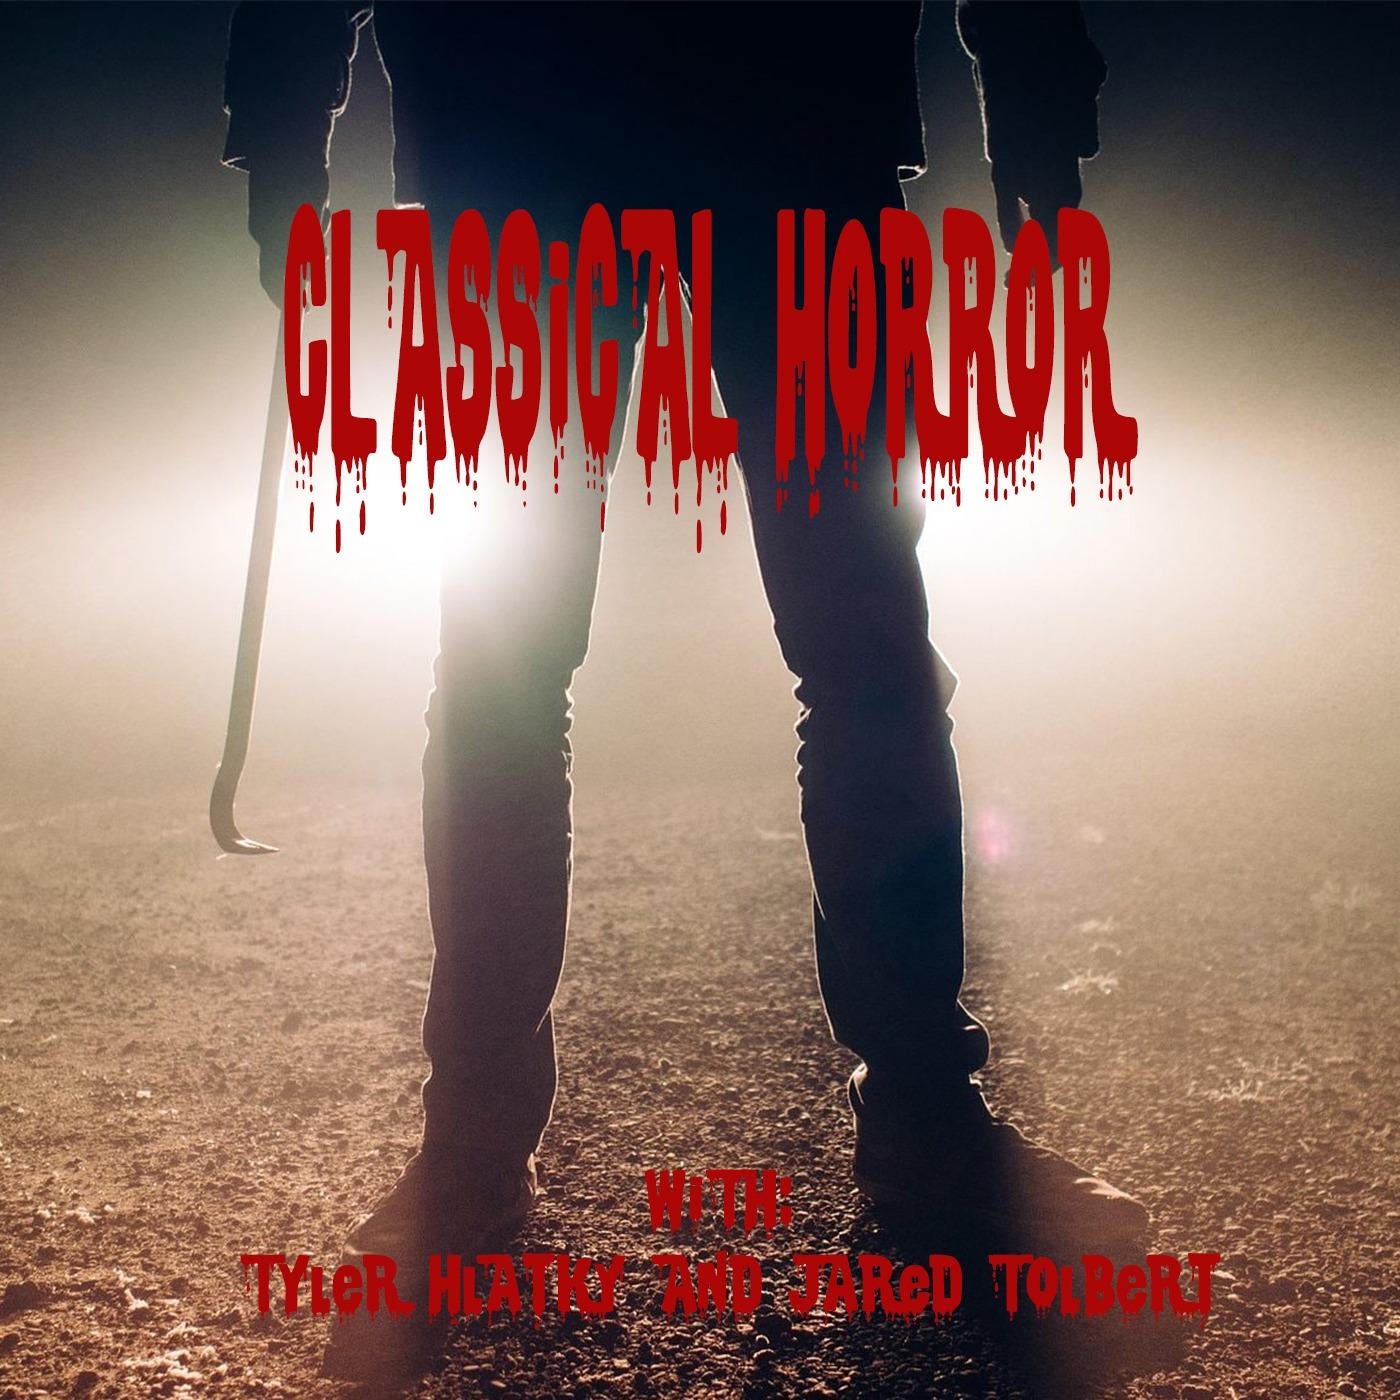 Classical Horror with Tyler Hlatky and Jared Tolbert